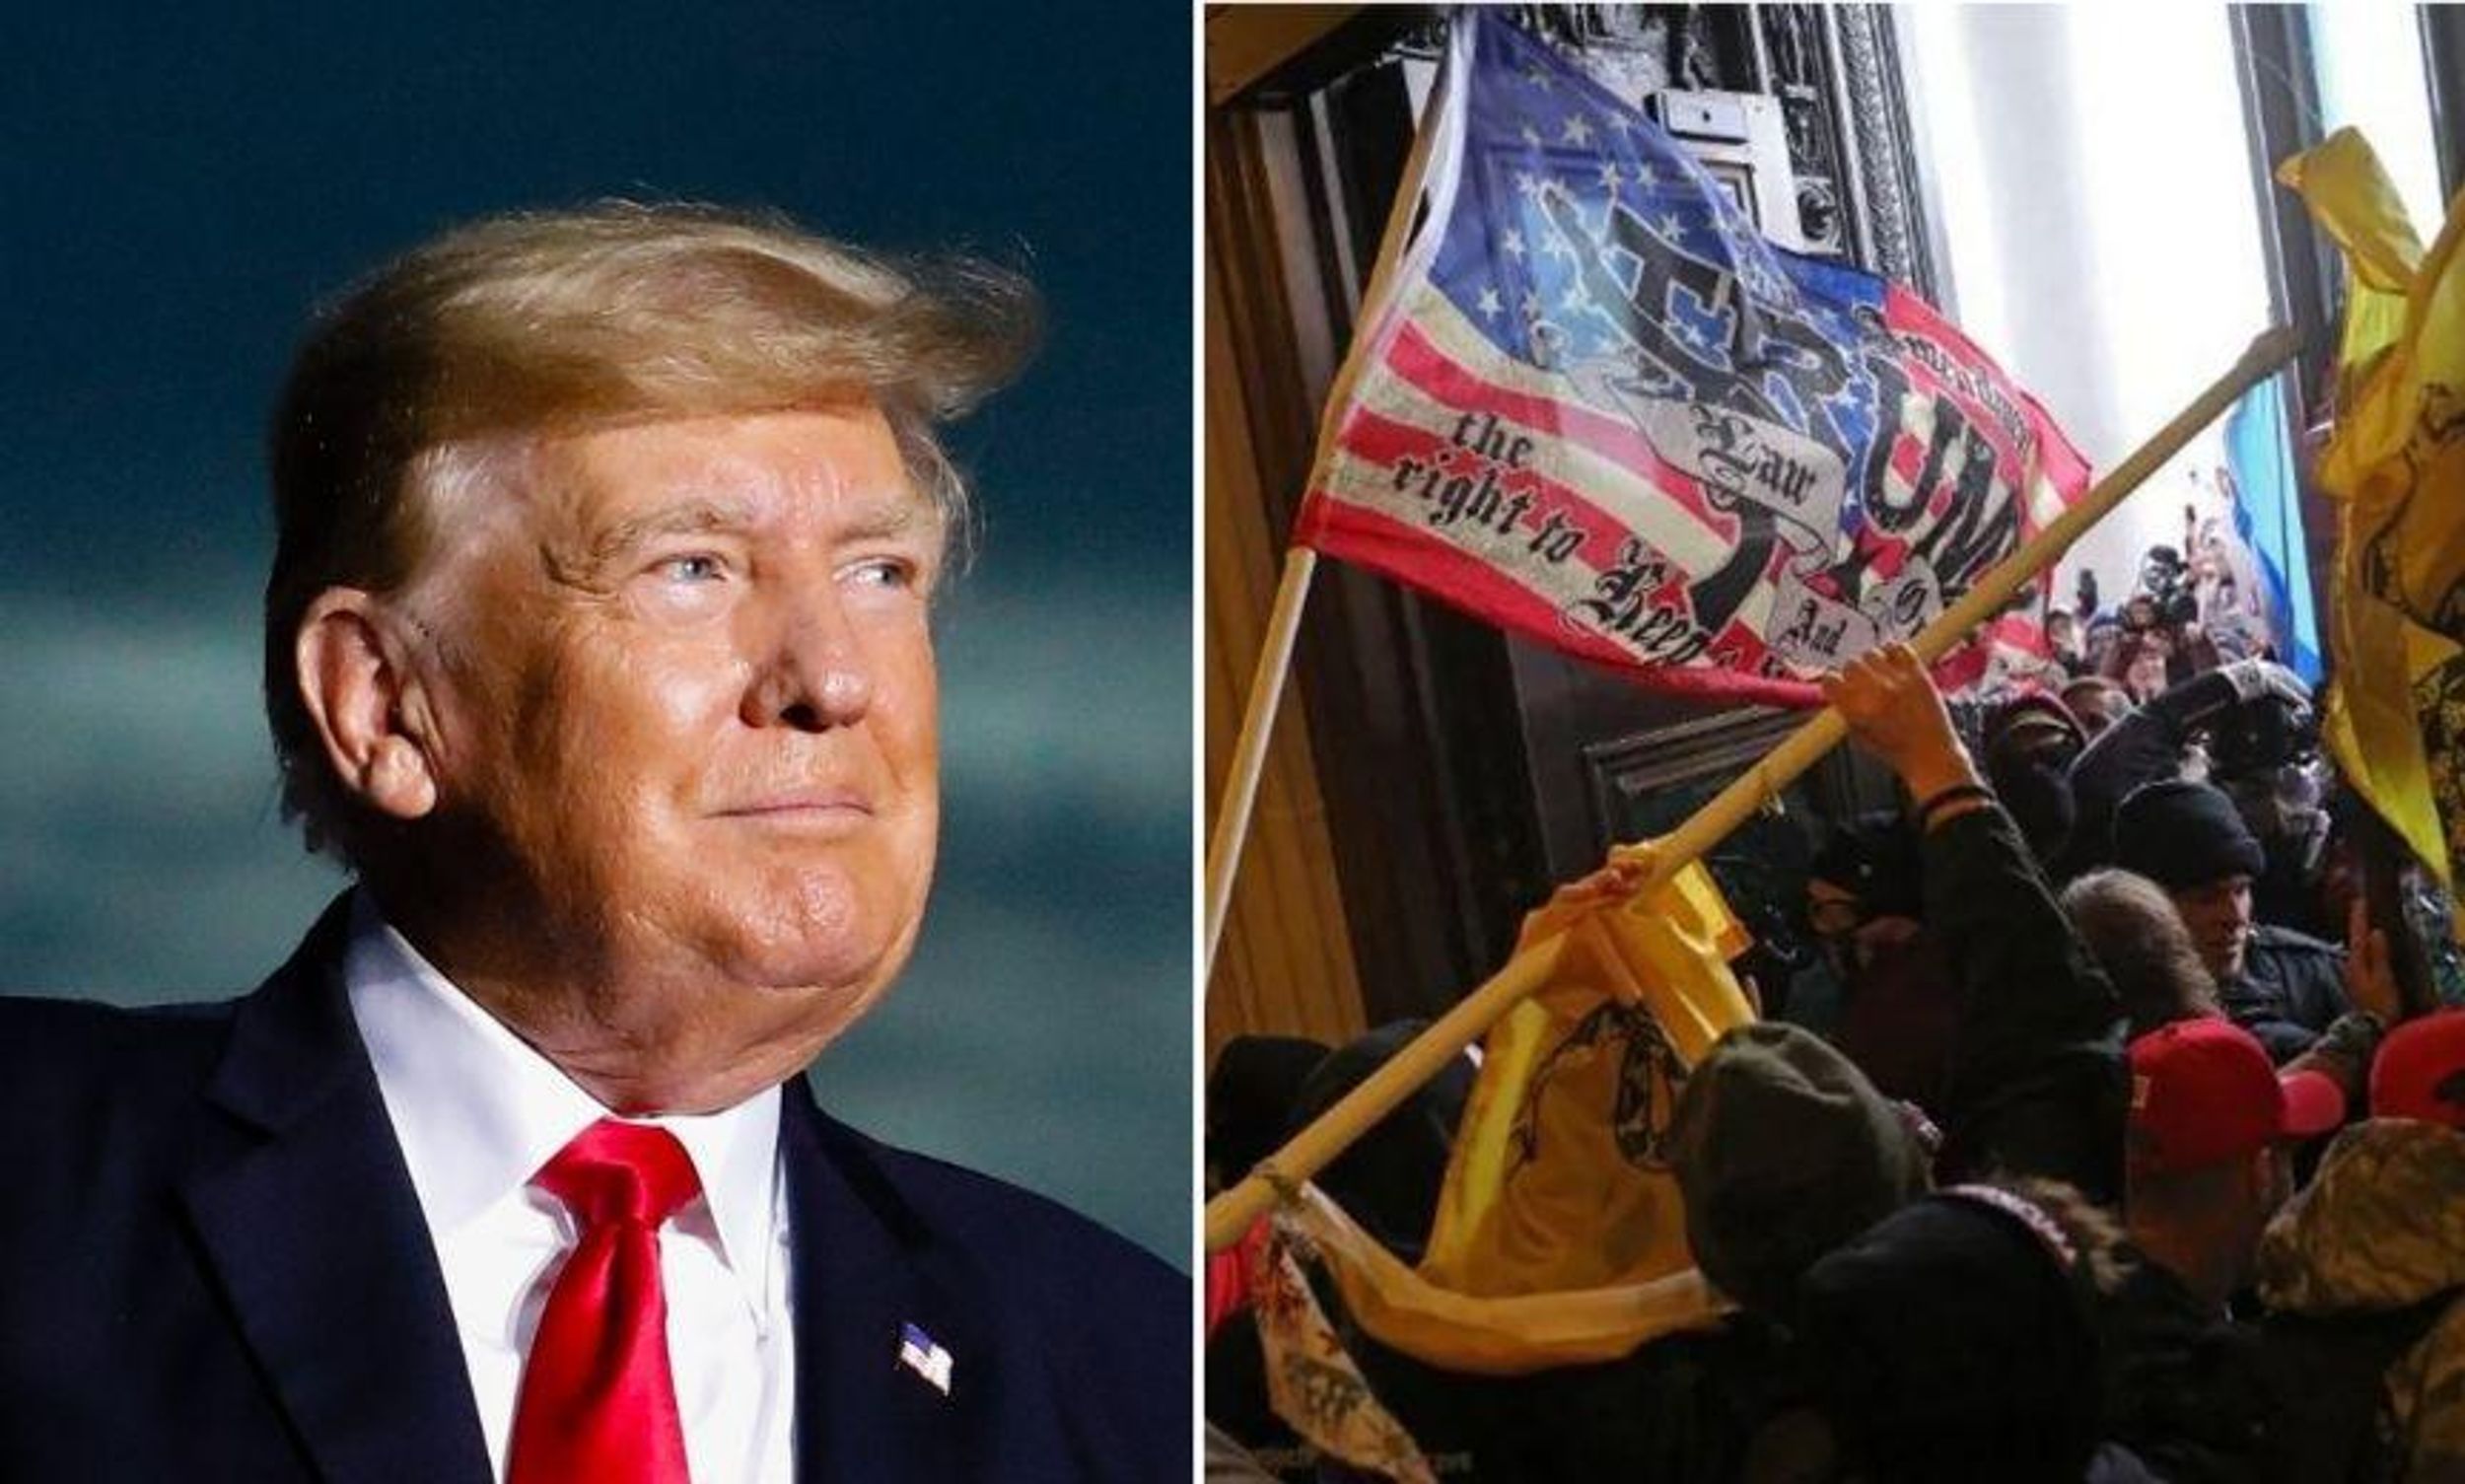 Trump Expresses Support for 'Persecuted' Rioters of January 6 'Protest' in Bonkers Statement